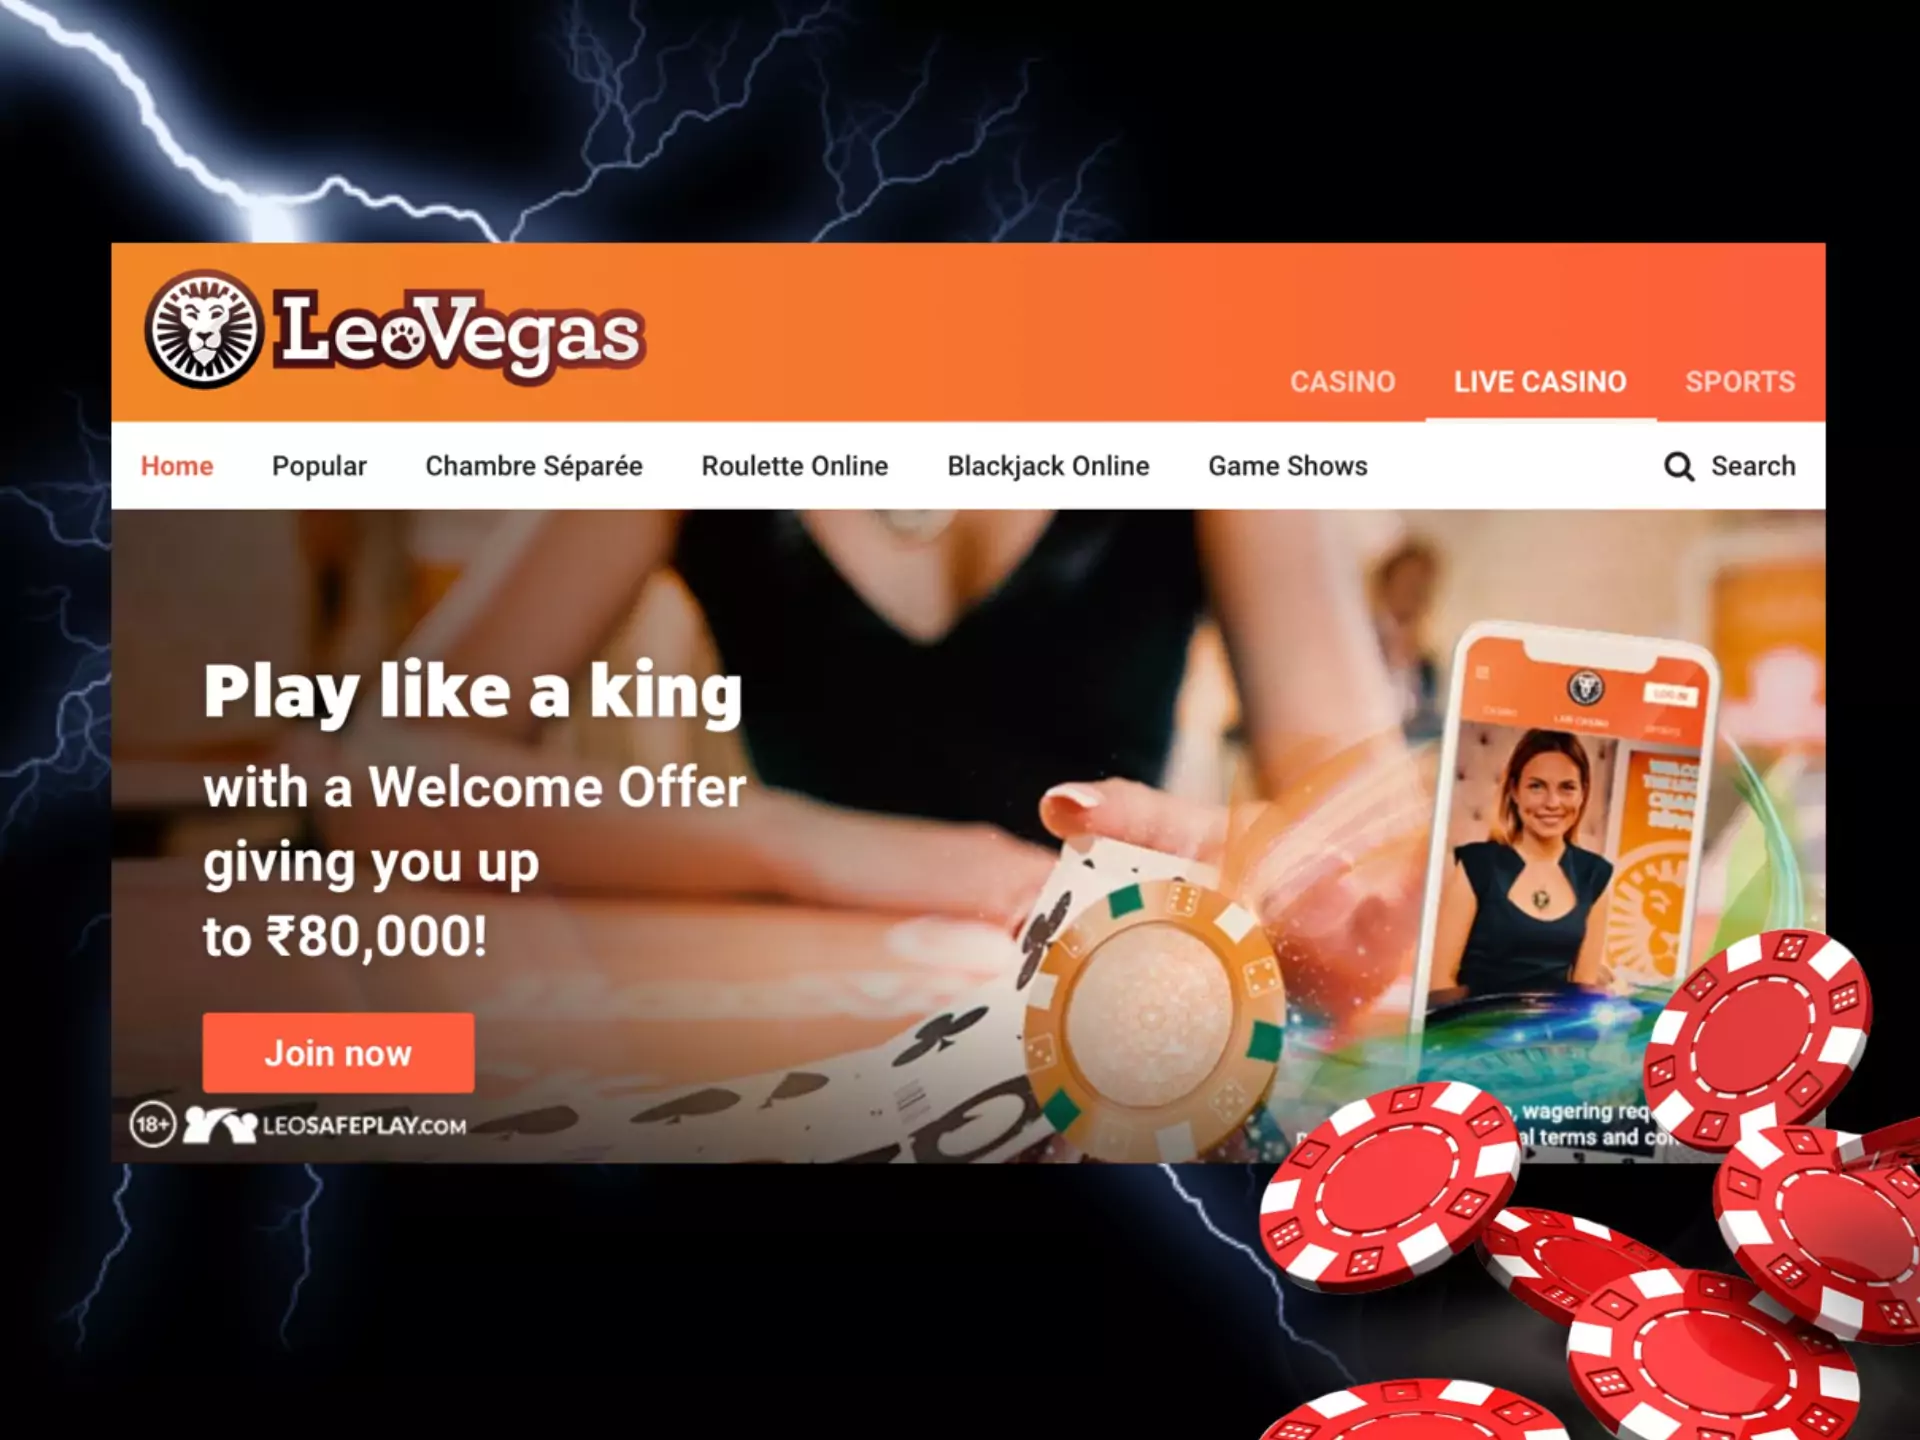 You can spend your bonus in LeoVegas live casino games.